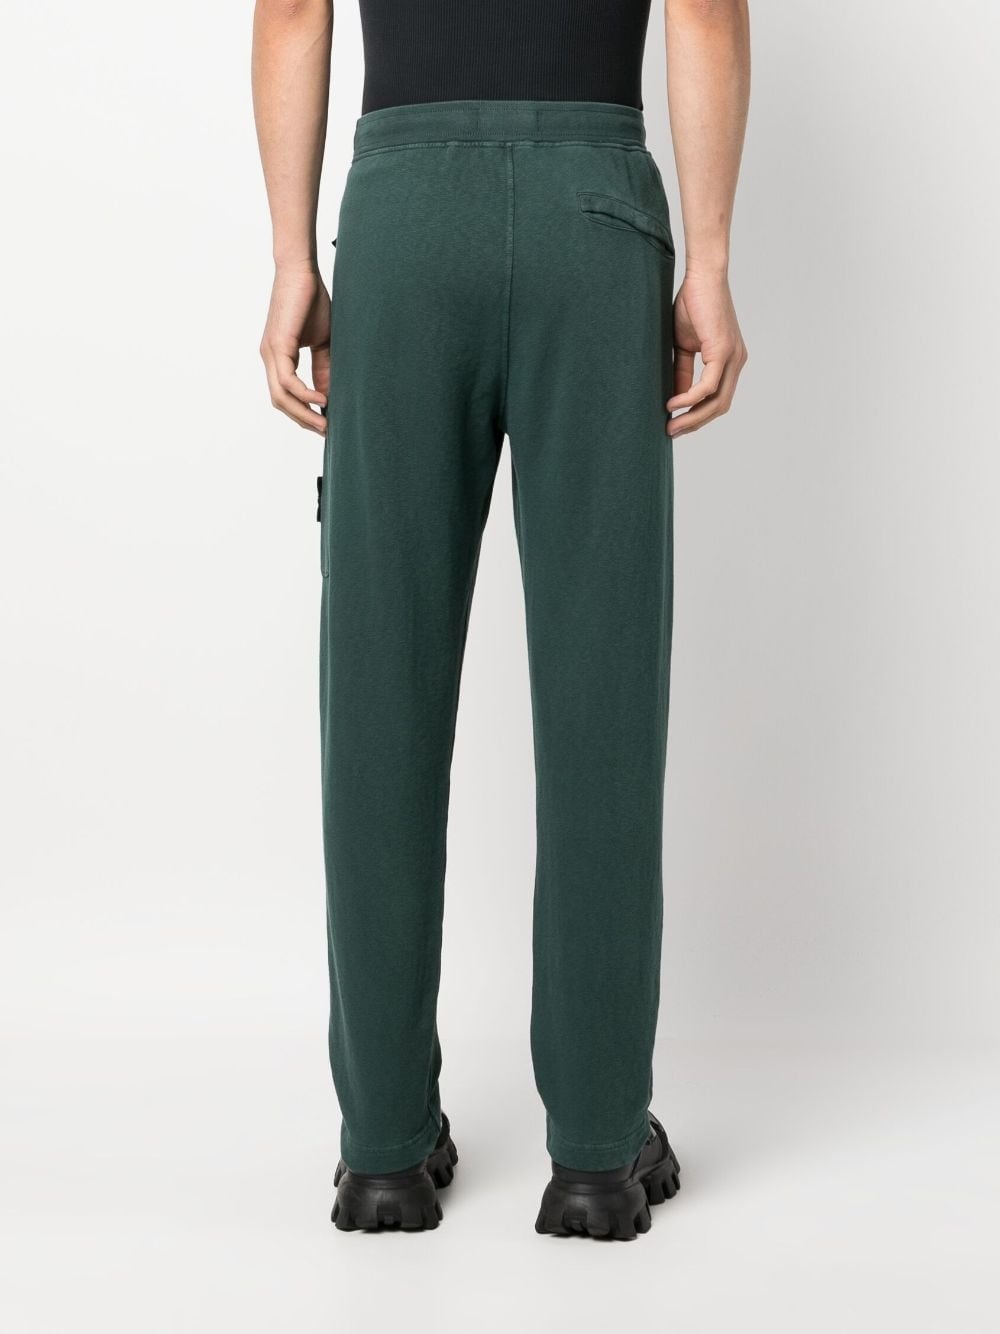 Compass patch track pants - 4